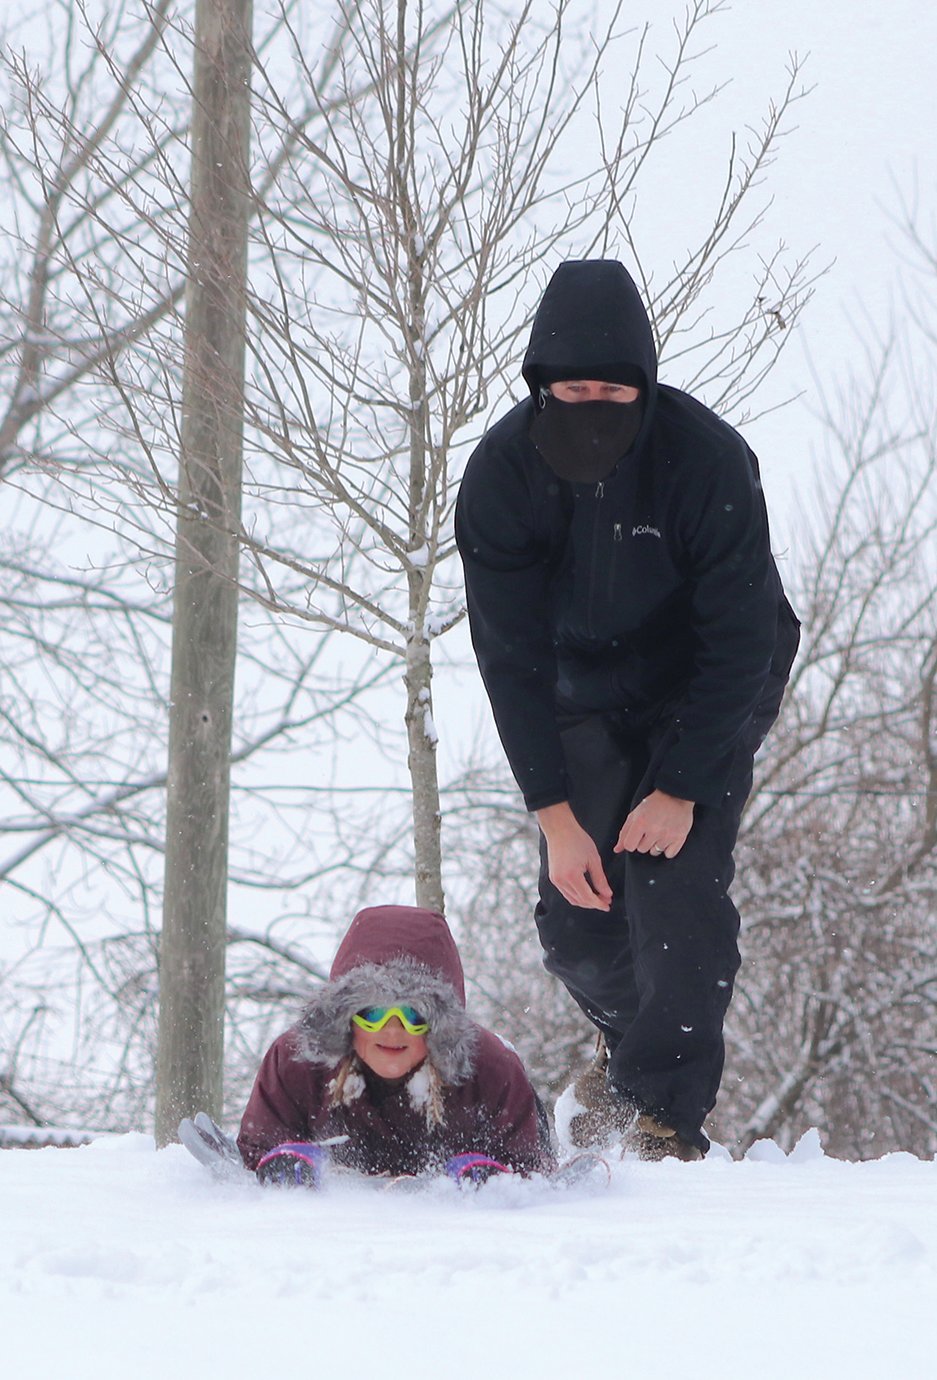 Mabel Hoar, 11, gets a push from dad Panch Hoar to get the best run down a snow-covered hillside at Milligan Park.